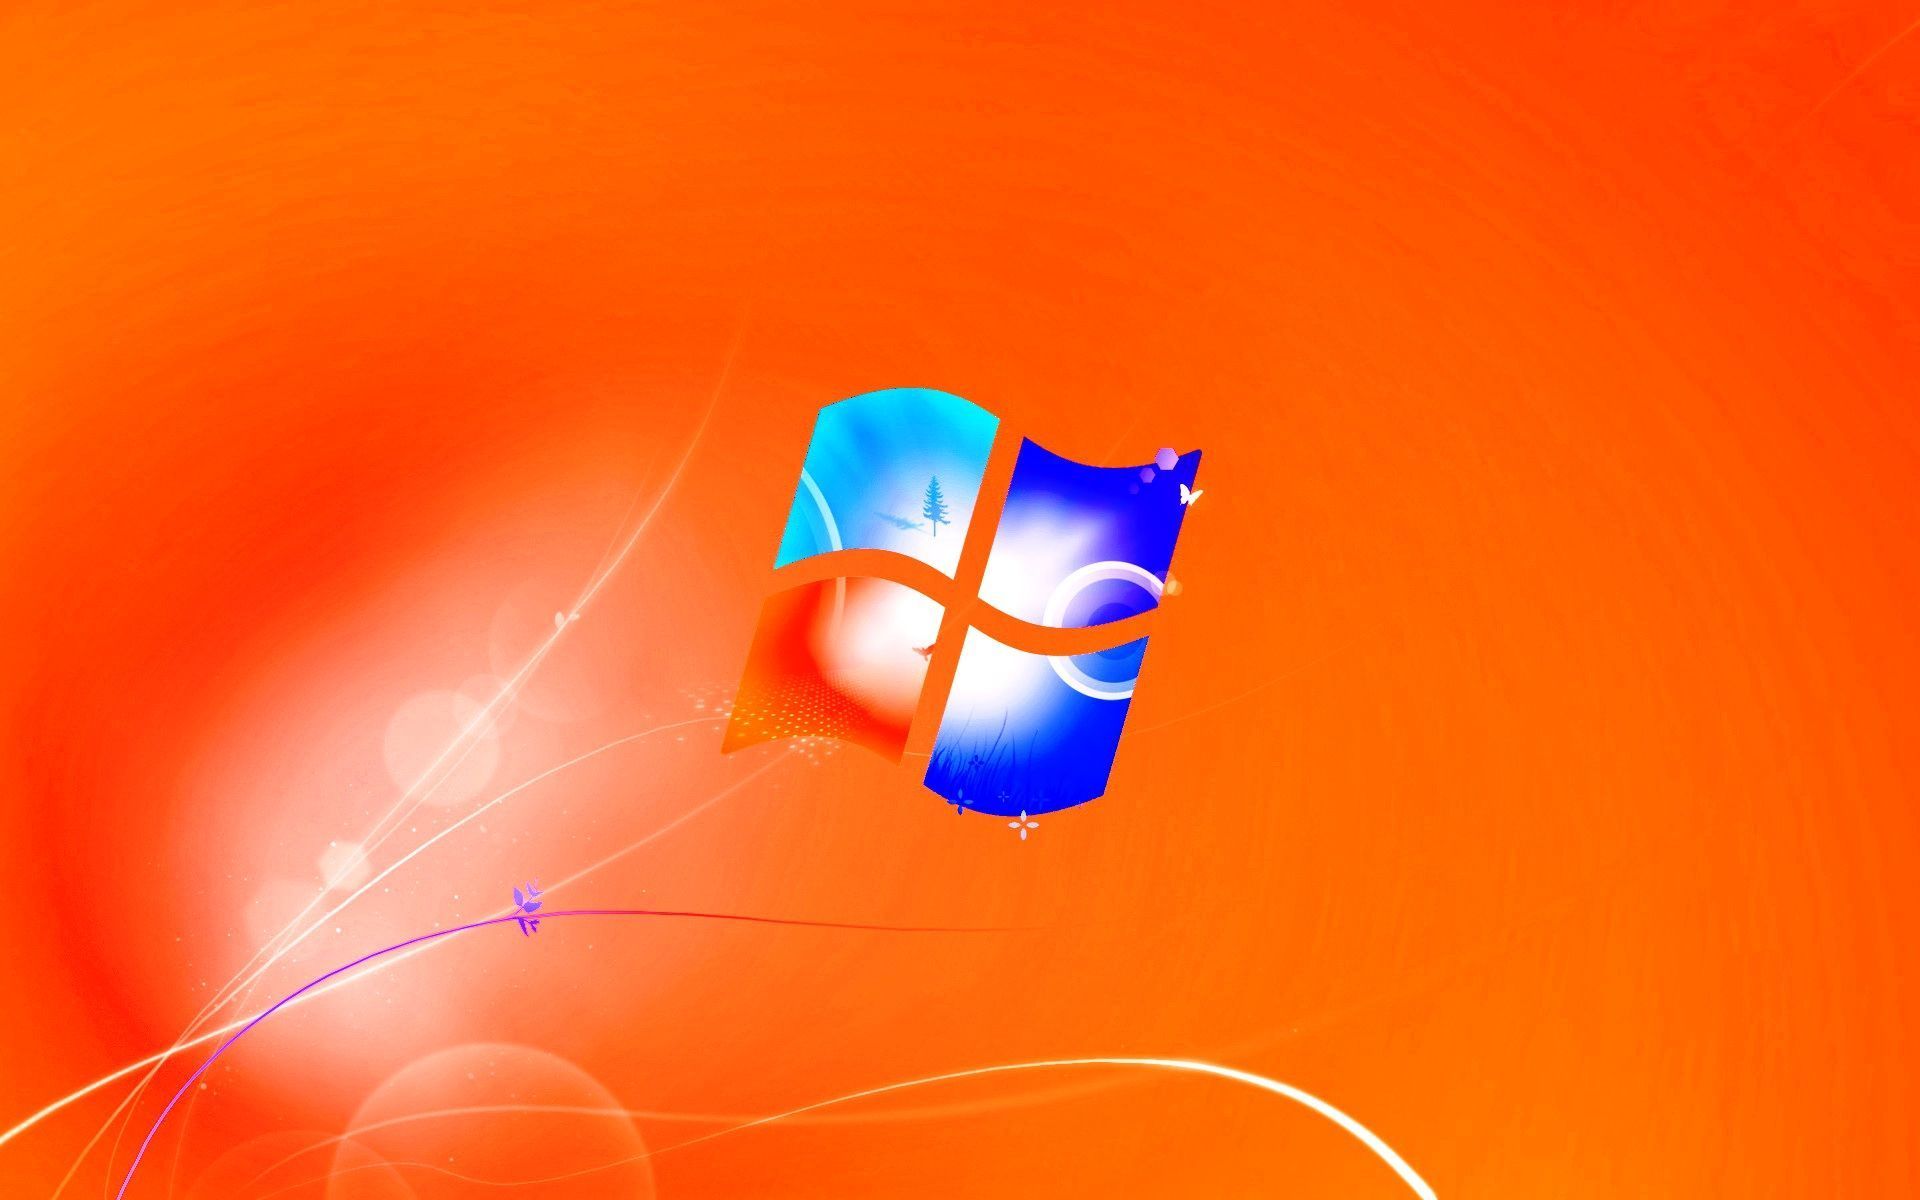 Animated Desktop Wallpaper Windows 7 Free: Animated by Free ...